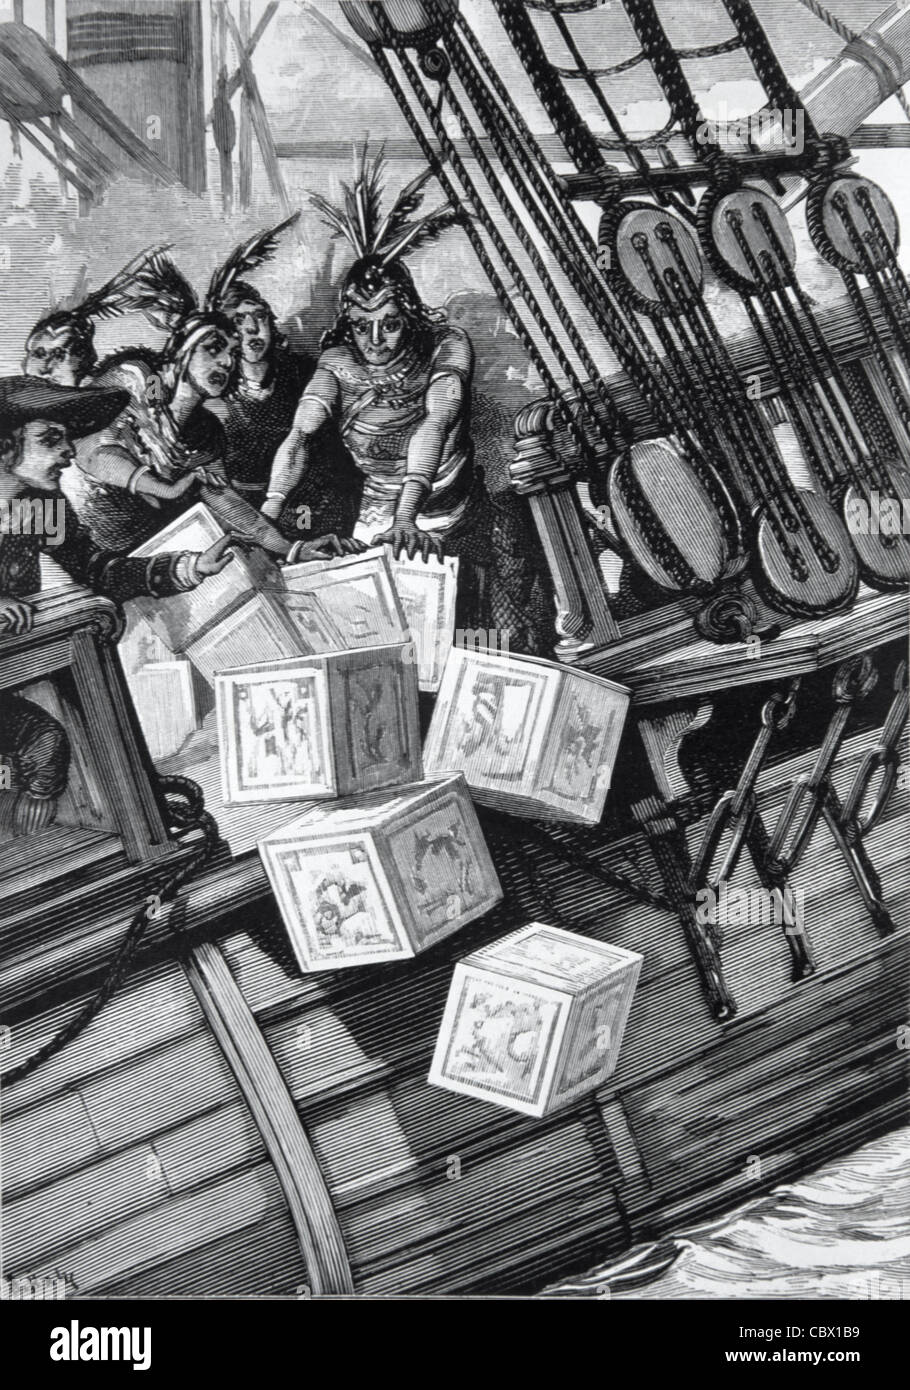 Boston Tea Party, 16 December 1773, When the Sons of Liberty Threw Cases of Tea into Boston Harbor in Protest at the Tea Act. c19th Engraving or Vintage Illustration Stock Photo